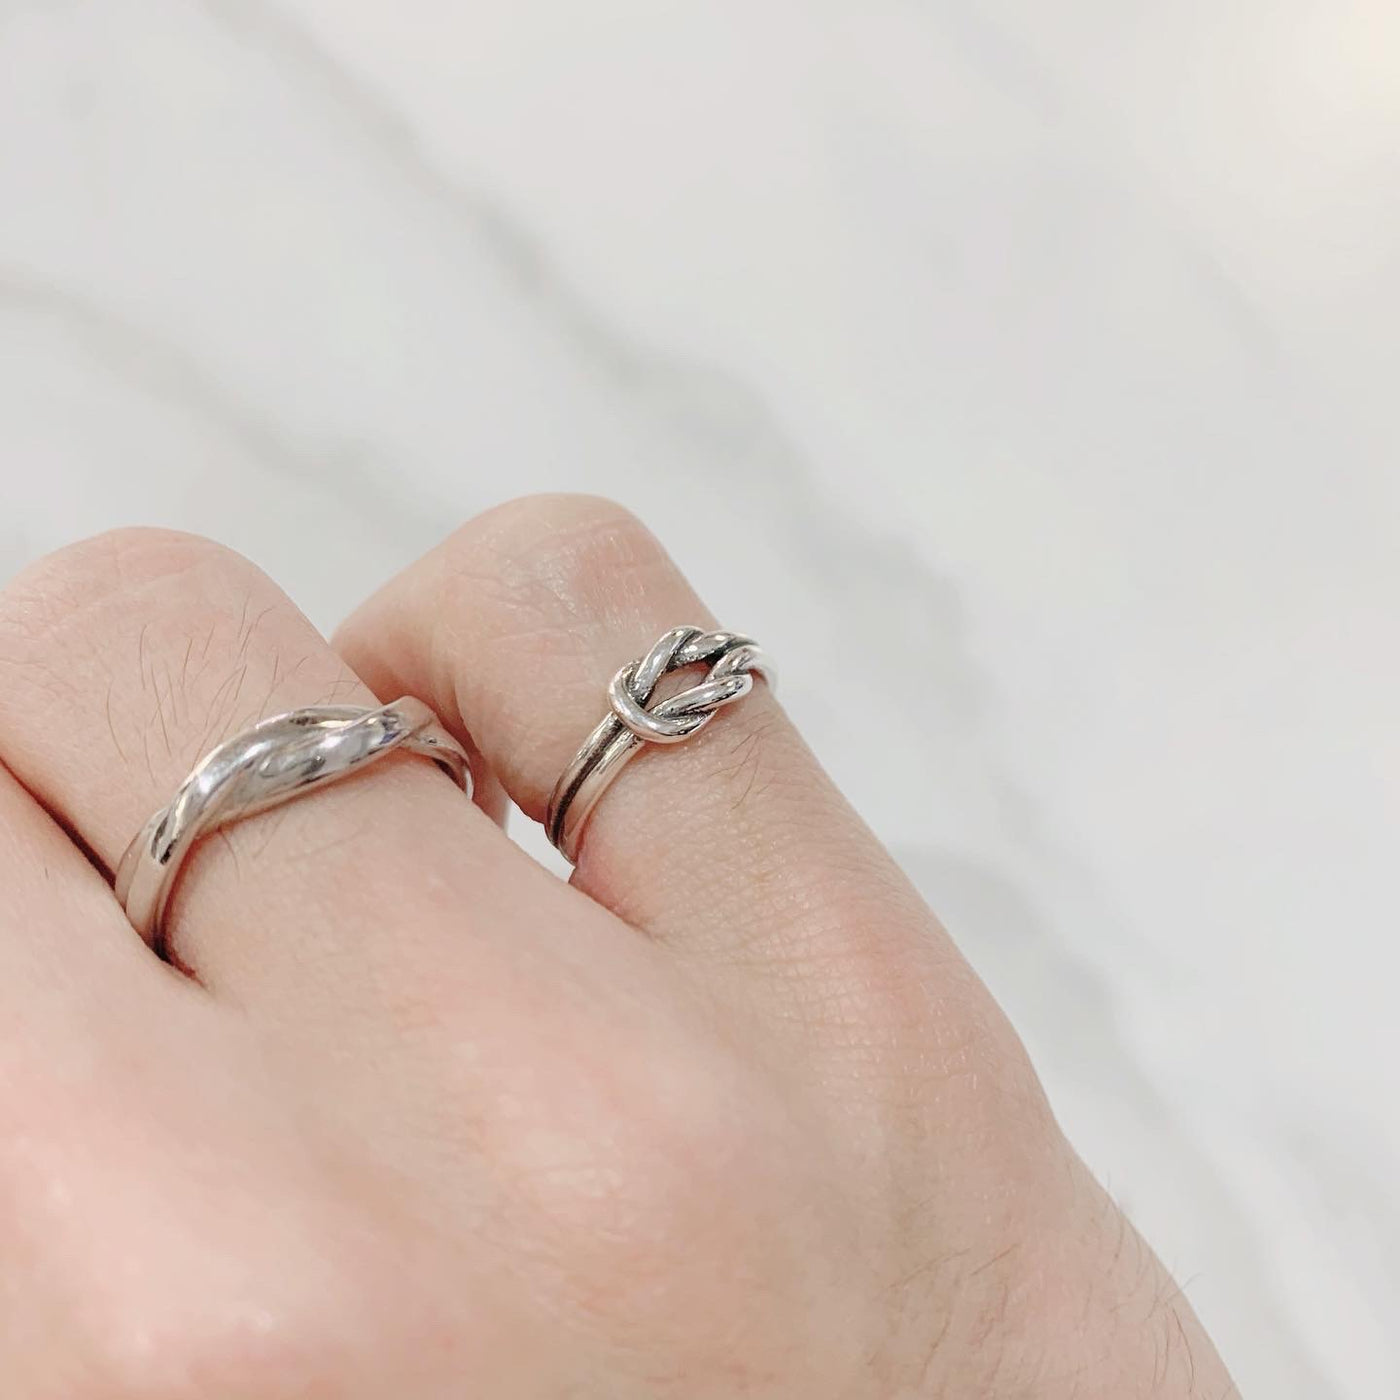 “Double knot” silver 925 ring